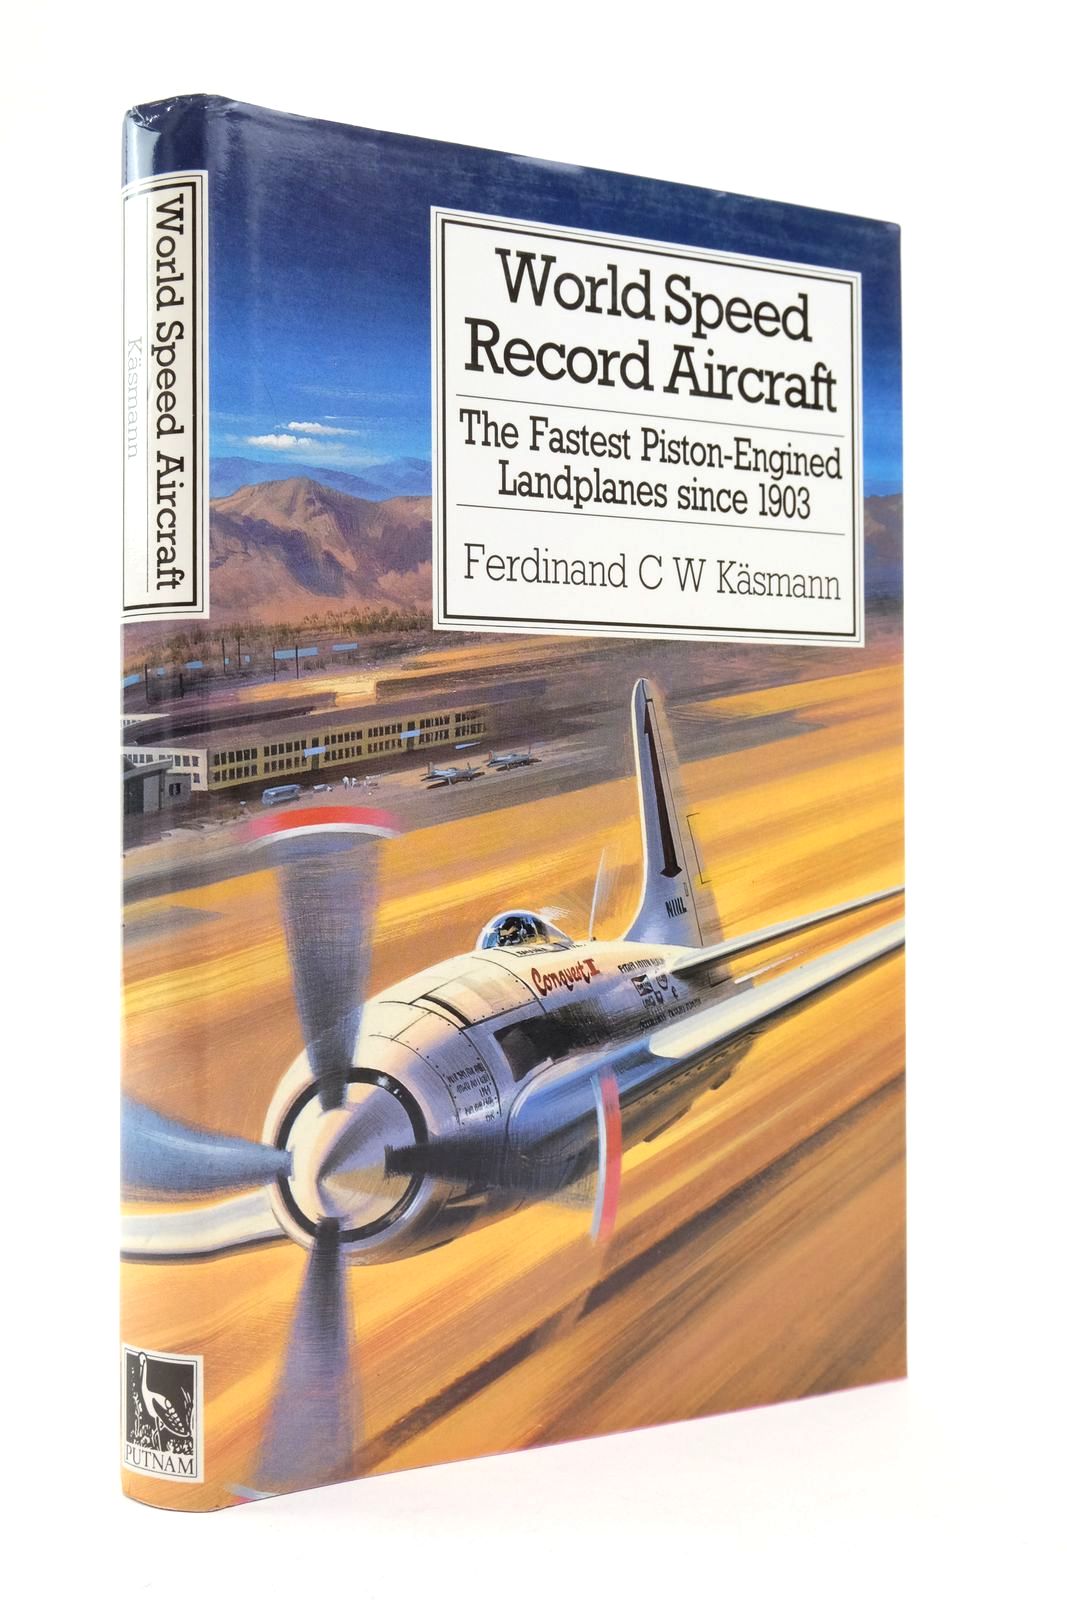 Photo of WORLD SPEED RECORD AIRCRAFT: THE FASTEST PISTON-ENGINED LANDPLANES SINCE 1903 written by Kasmann, Ferdinand C.W. published by Putnam (STOCK CODE: 2138478)  for sale by Stella & Rose's Books